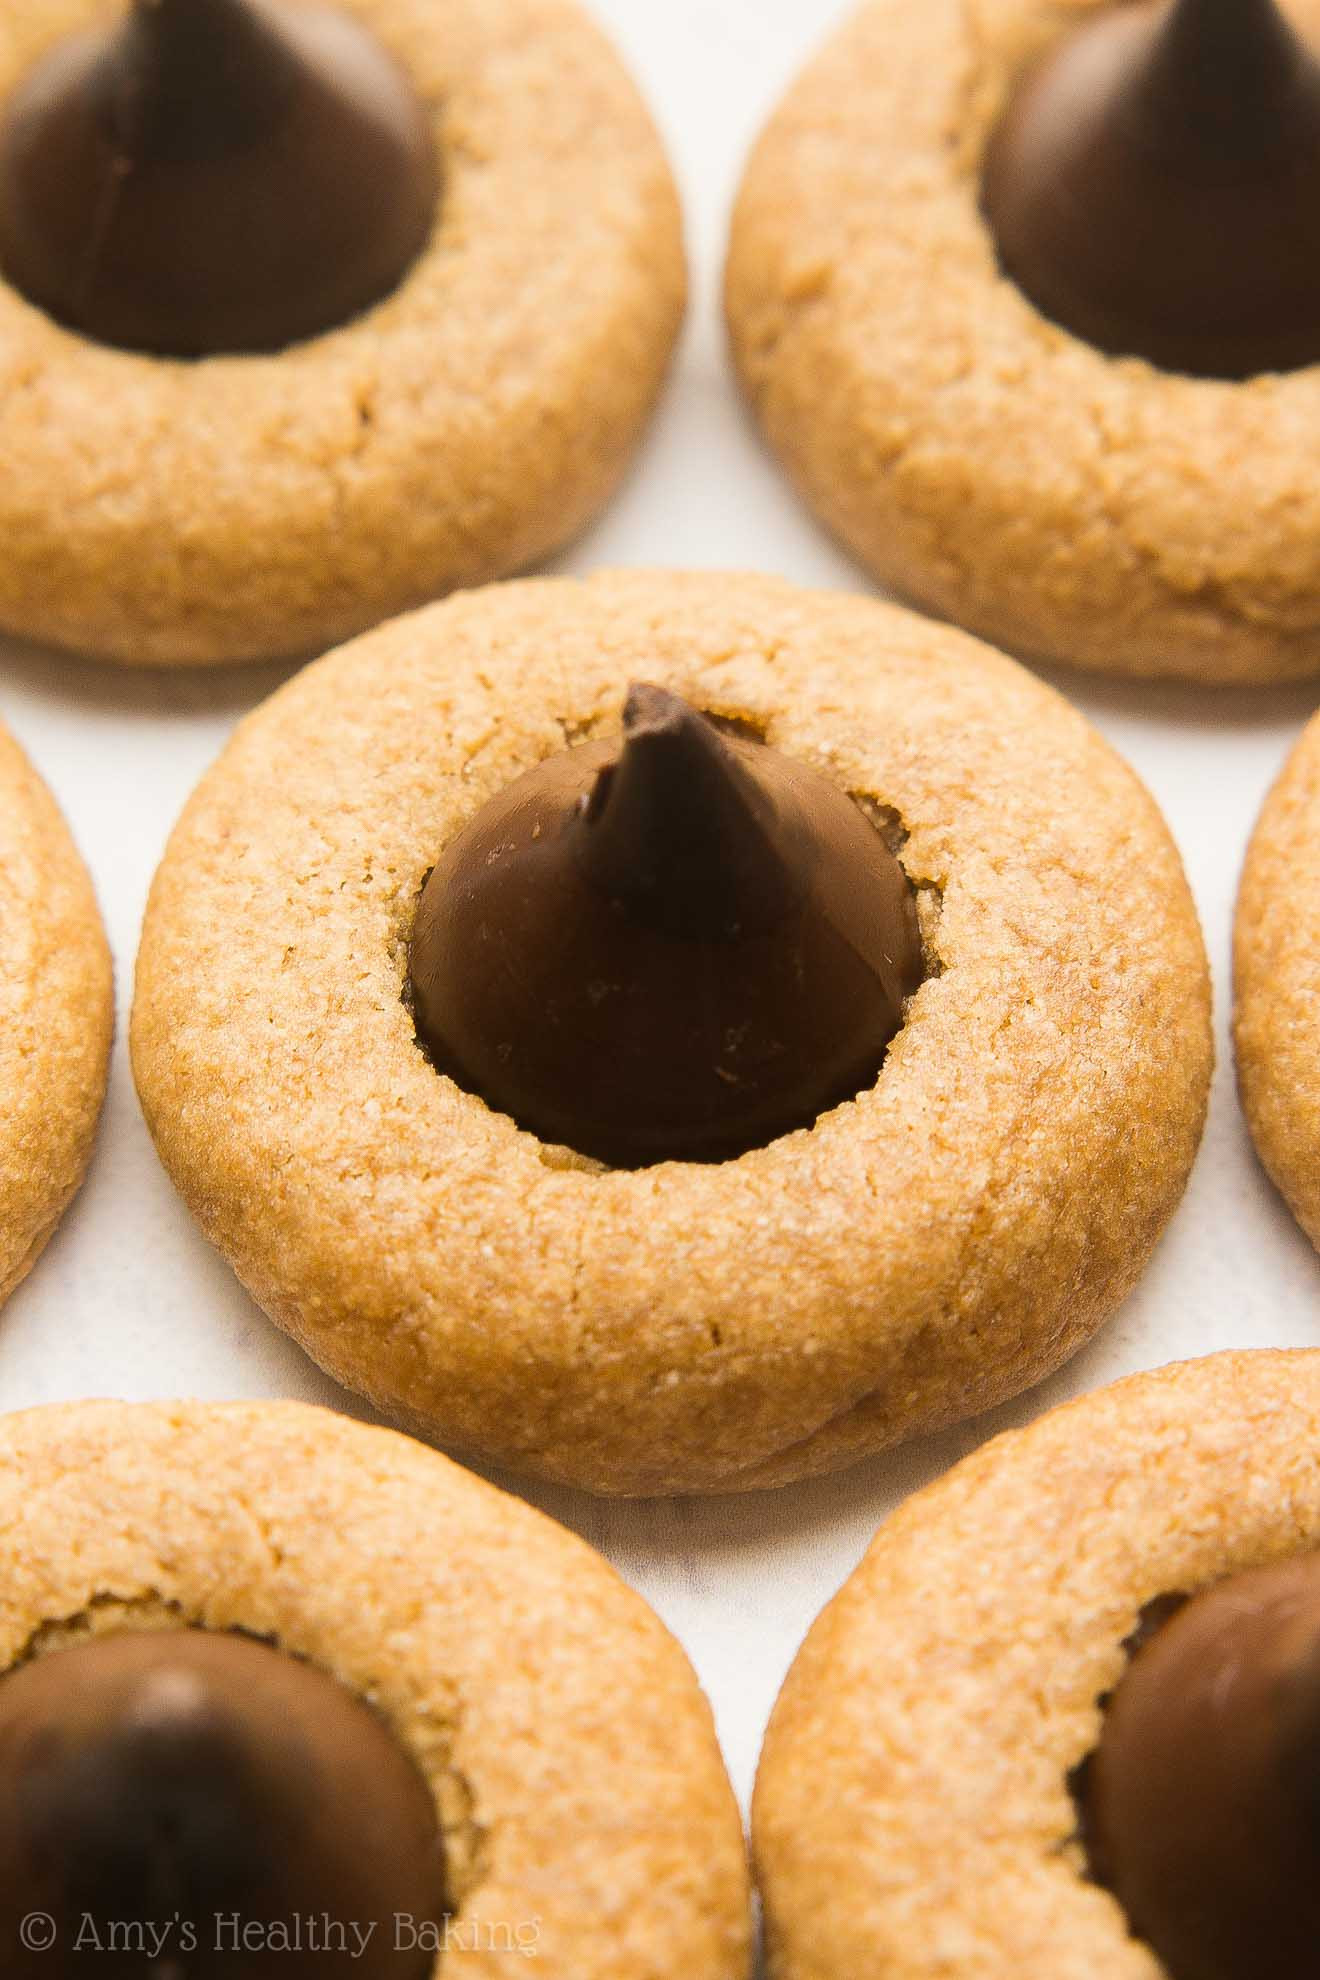 Healthy Peanut Butter Cookies 35 Calories
 The Ultimate Healthy Peanut Butter Blossoms